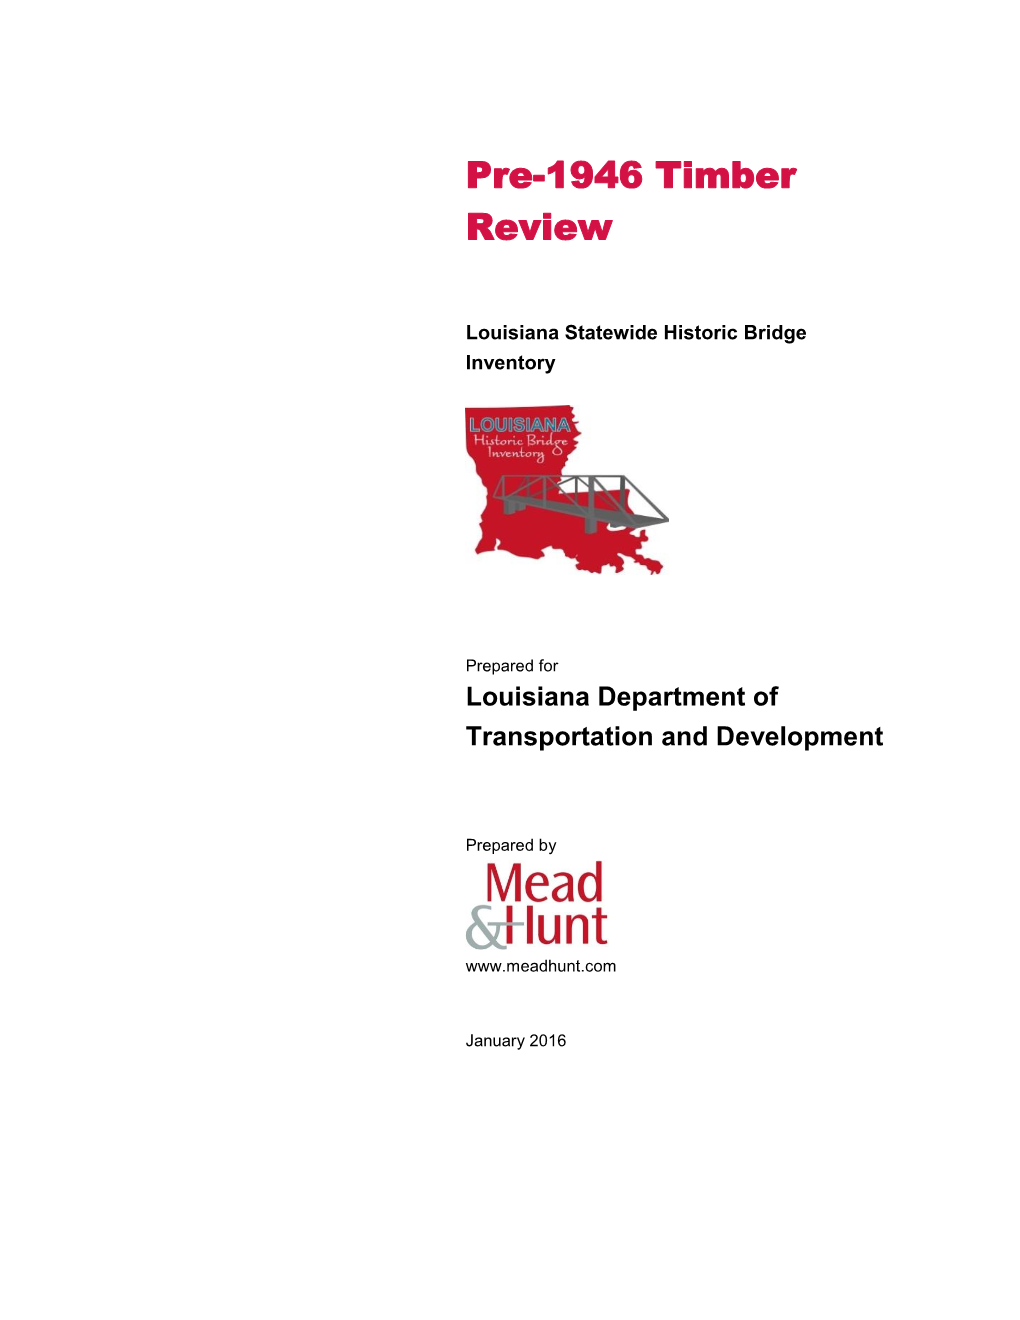 Pre-1946 Timber Review